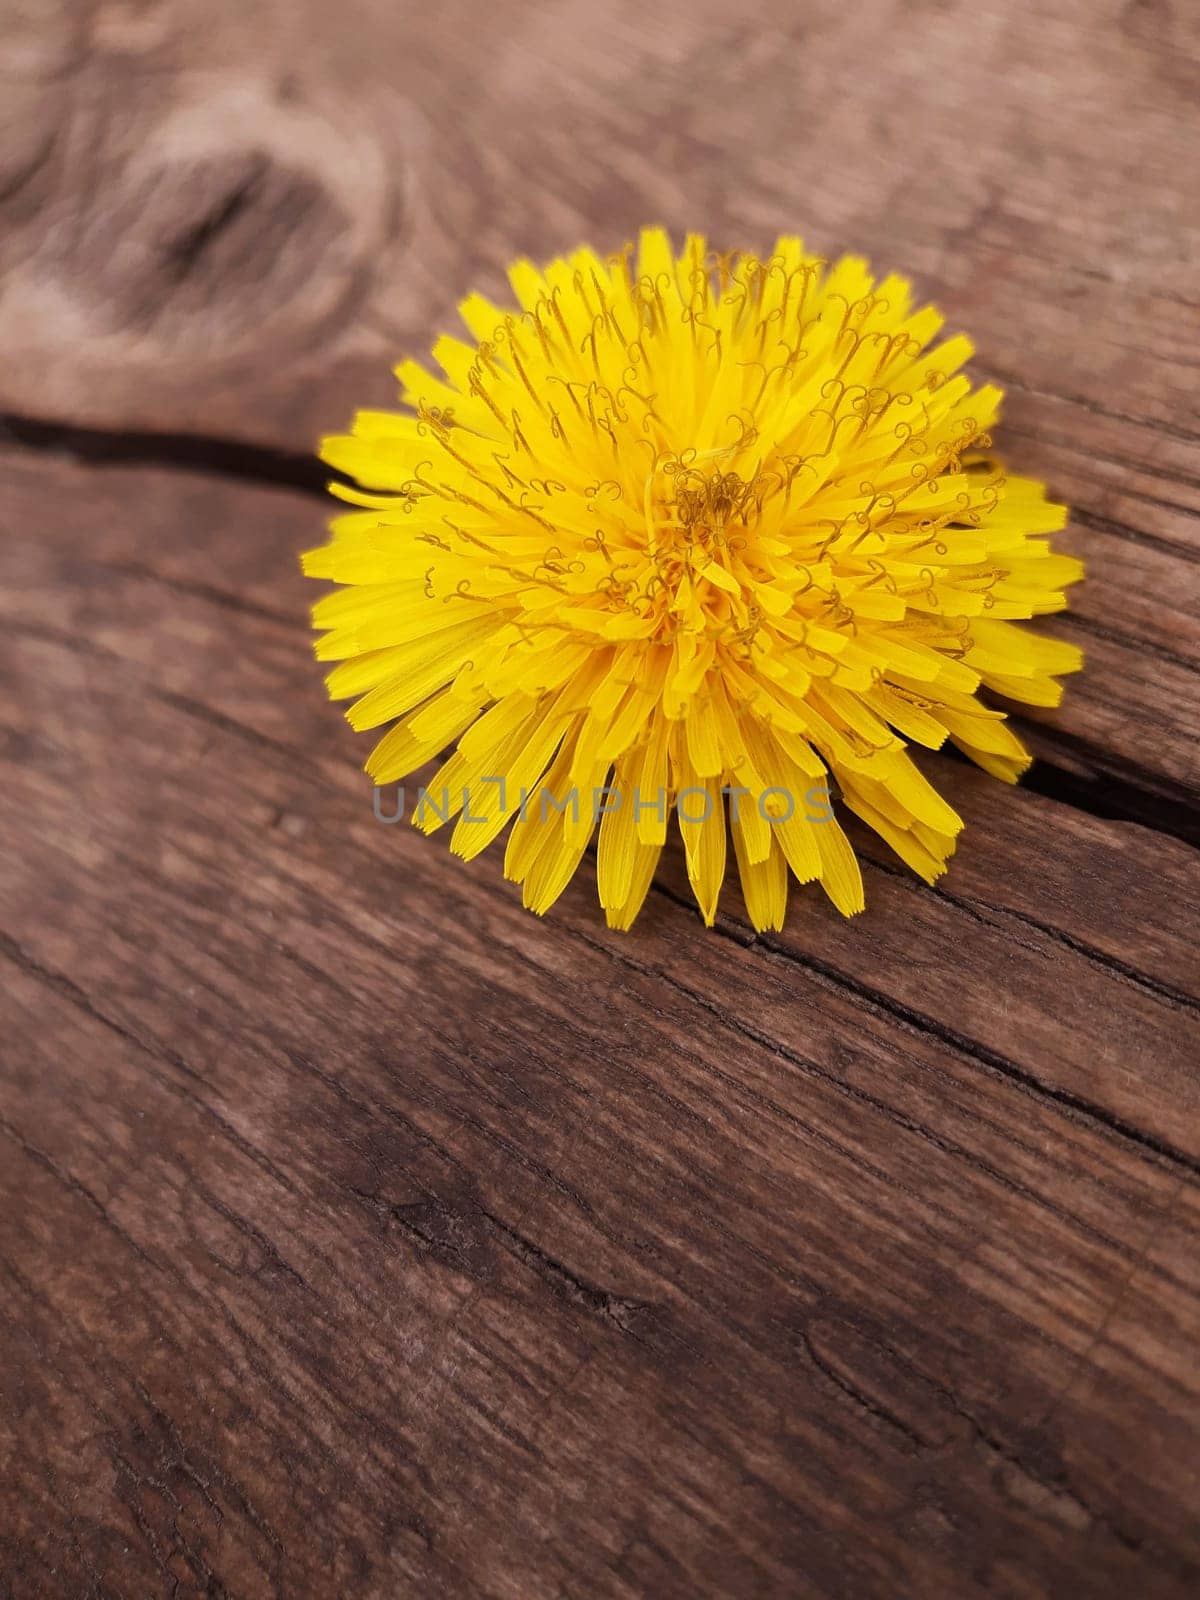 Yellow dandelion flower on a wooden stump in early spring in the park close-up.Dandelion.